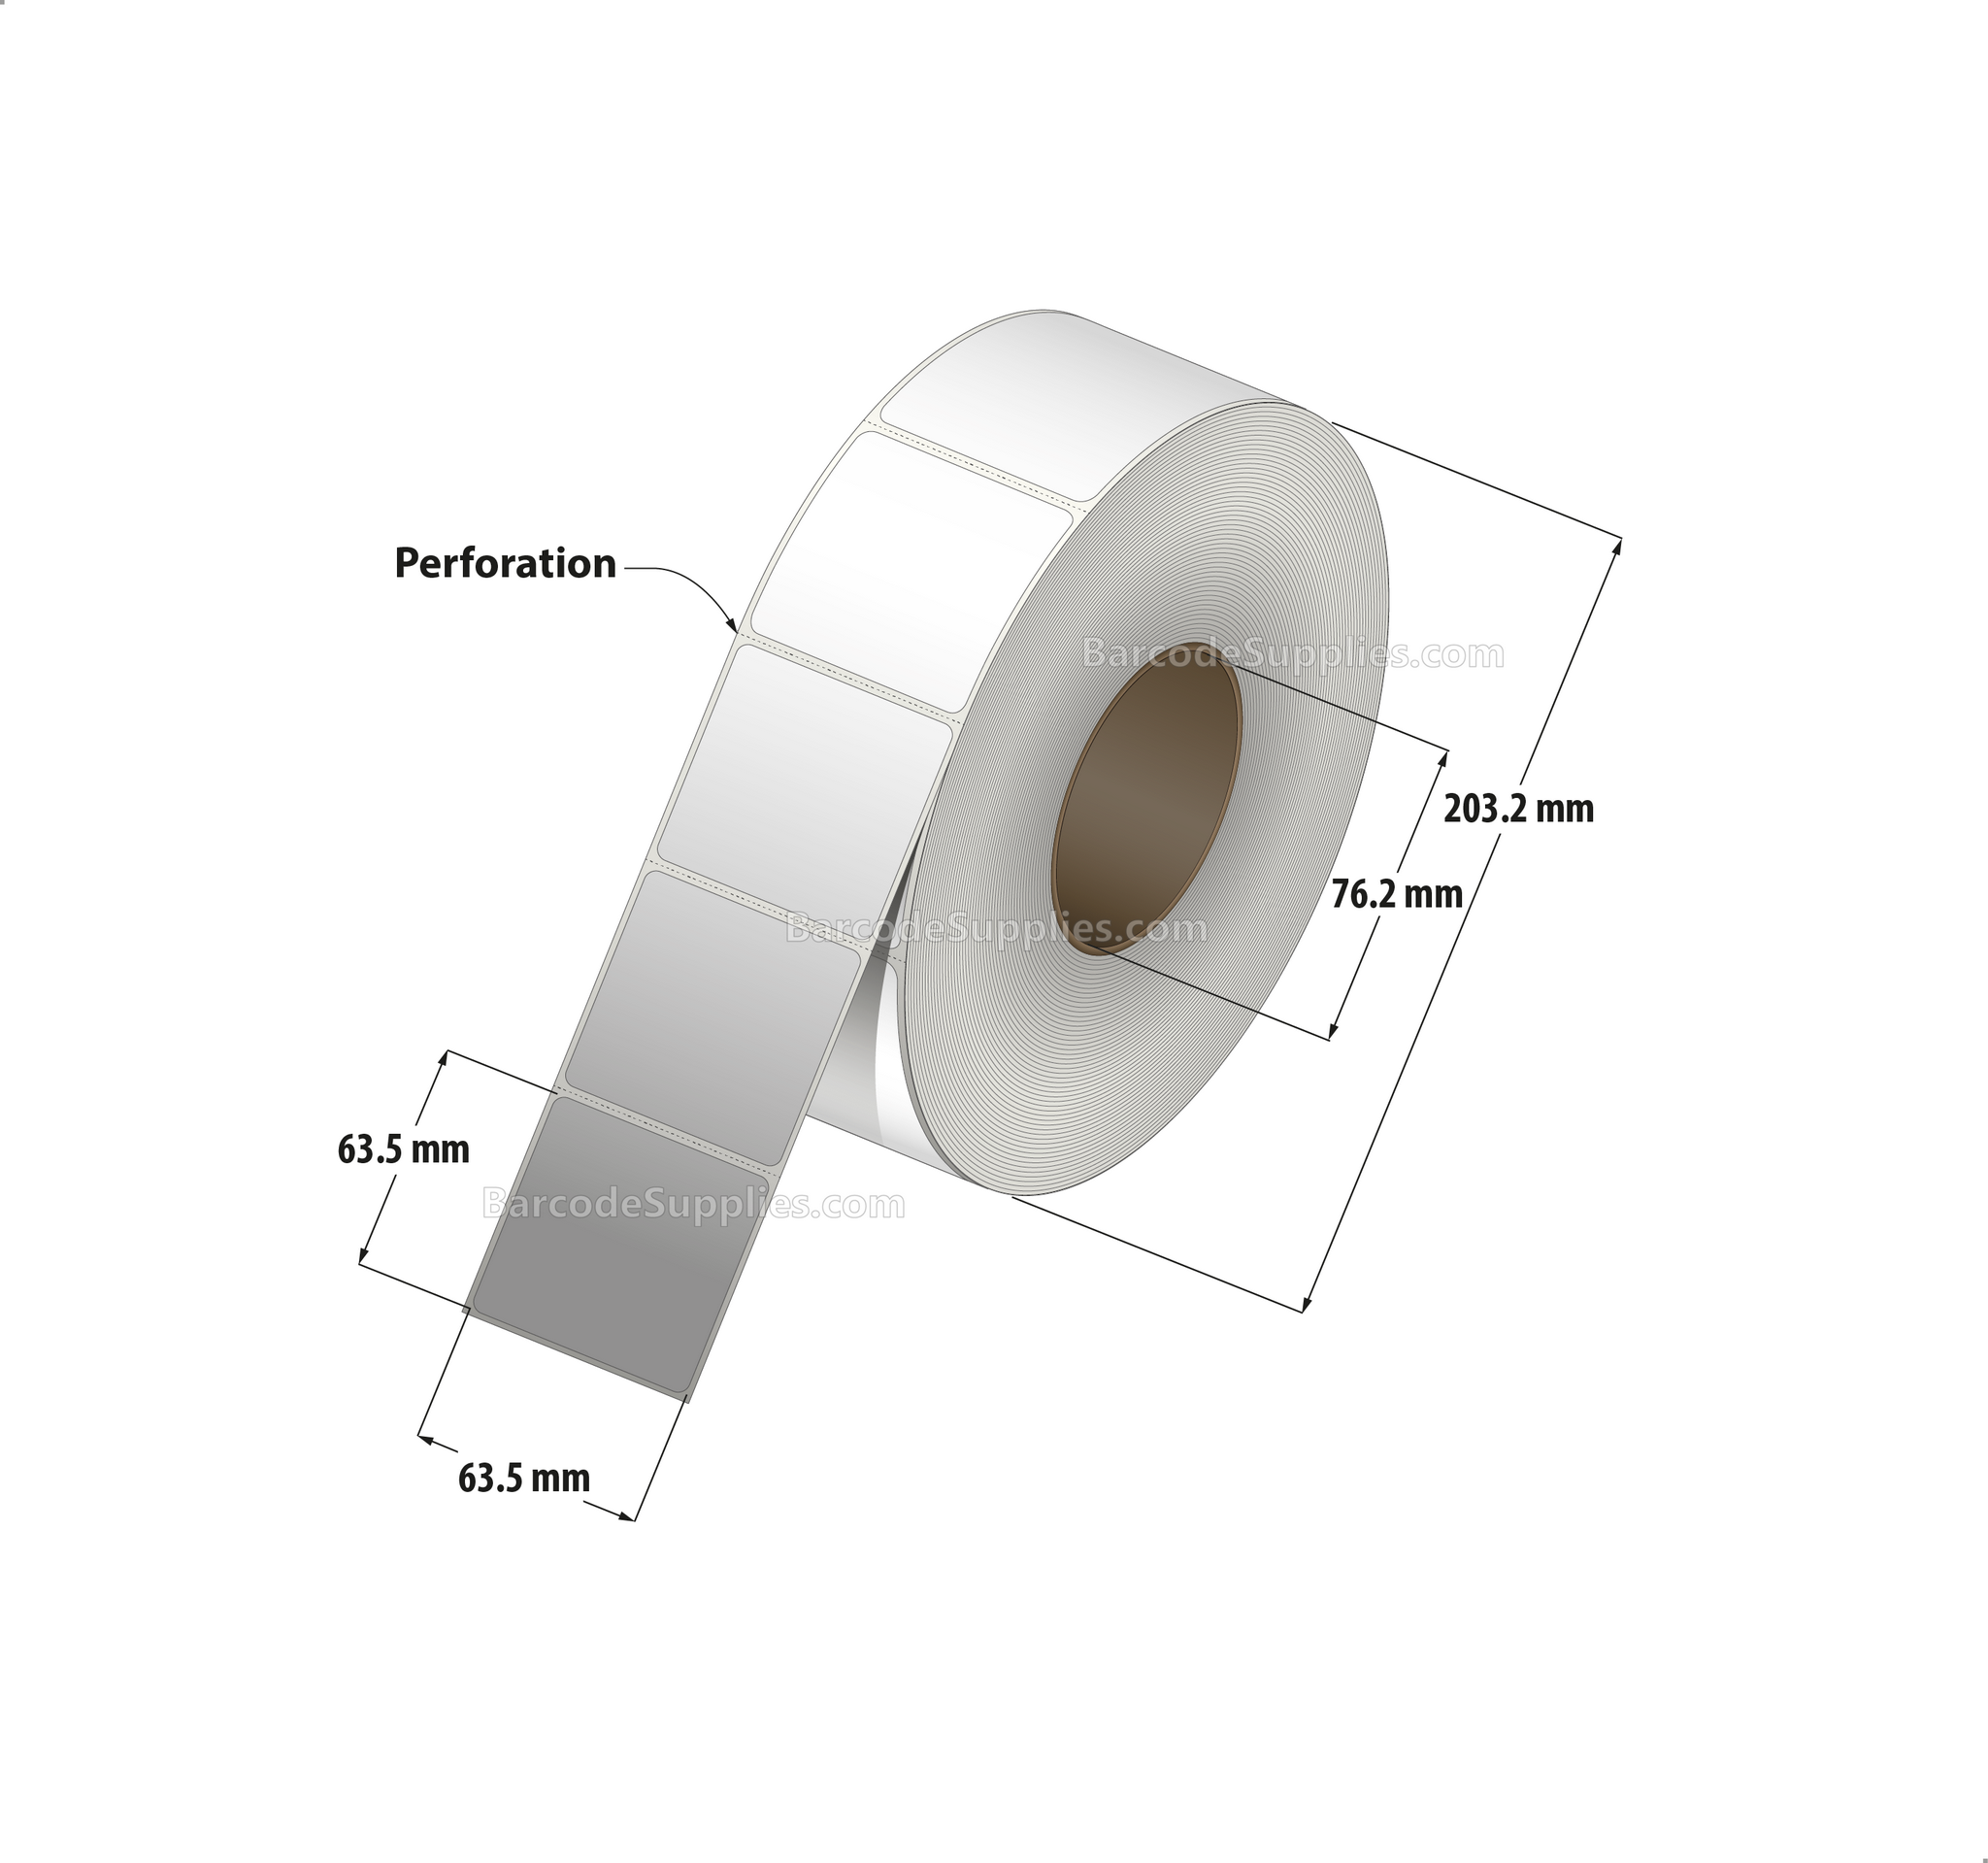 2.5 x 2.5 Thermal Transfer White Labels With Permanent Adhesive - Perforated - 2500 Labels Per Roll - Carton Of 8 Rolls - 20000 Labels Total - MPN: RT-25-25-2500-3